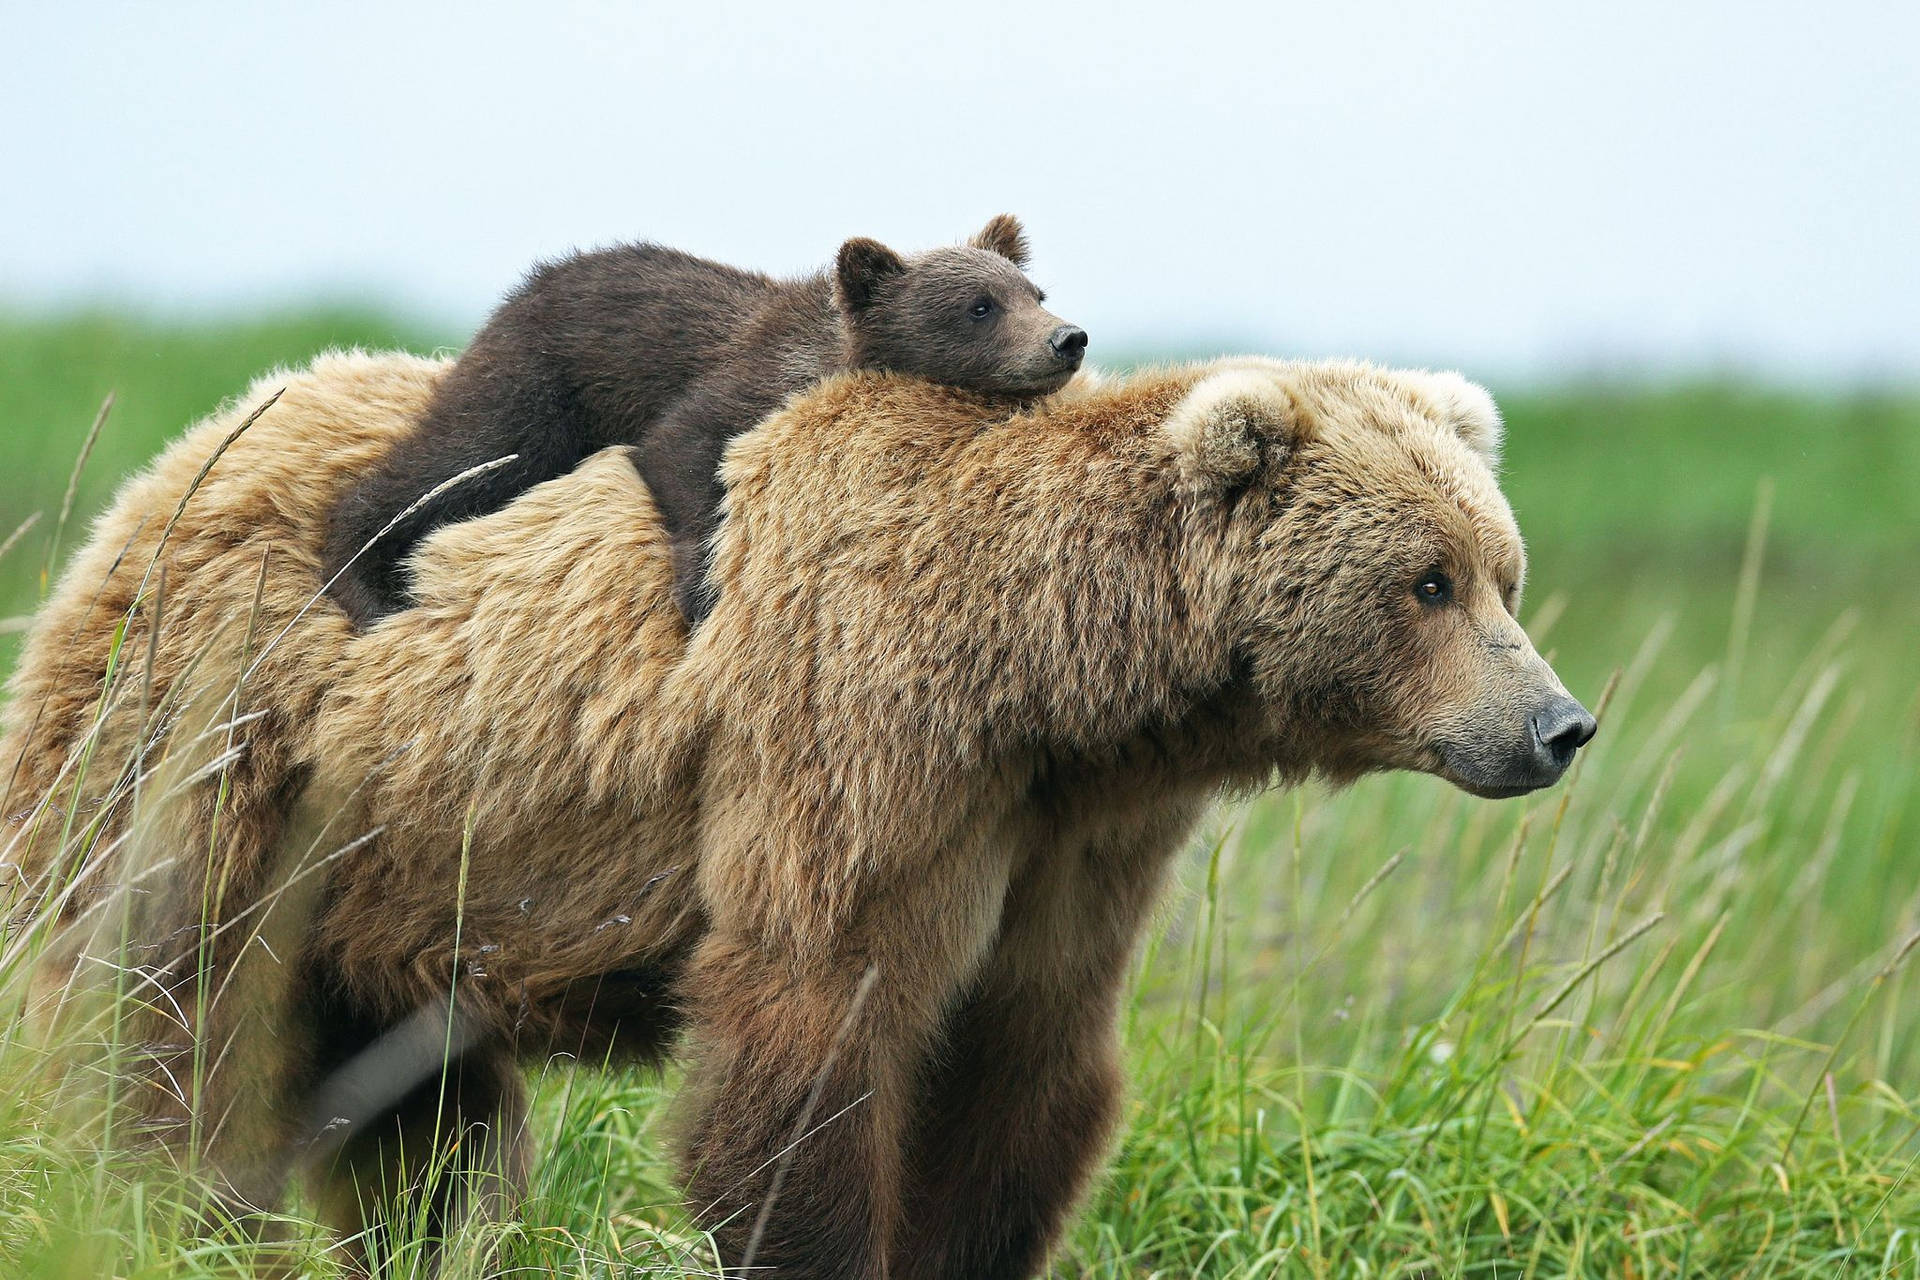 A mother bear and her cub playing in a meadow Wallpaper